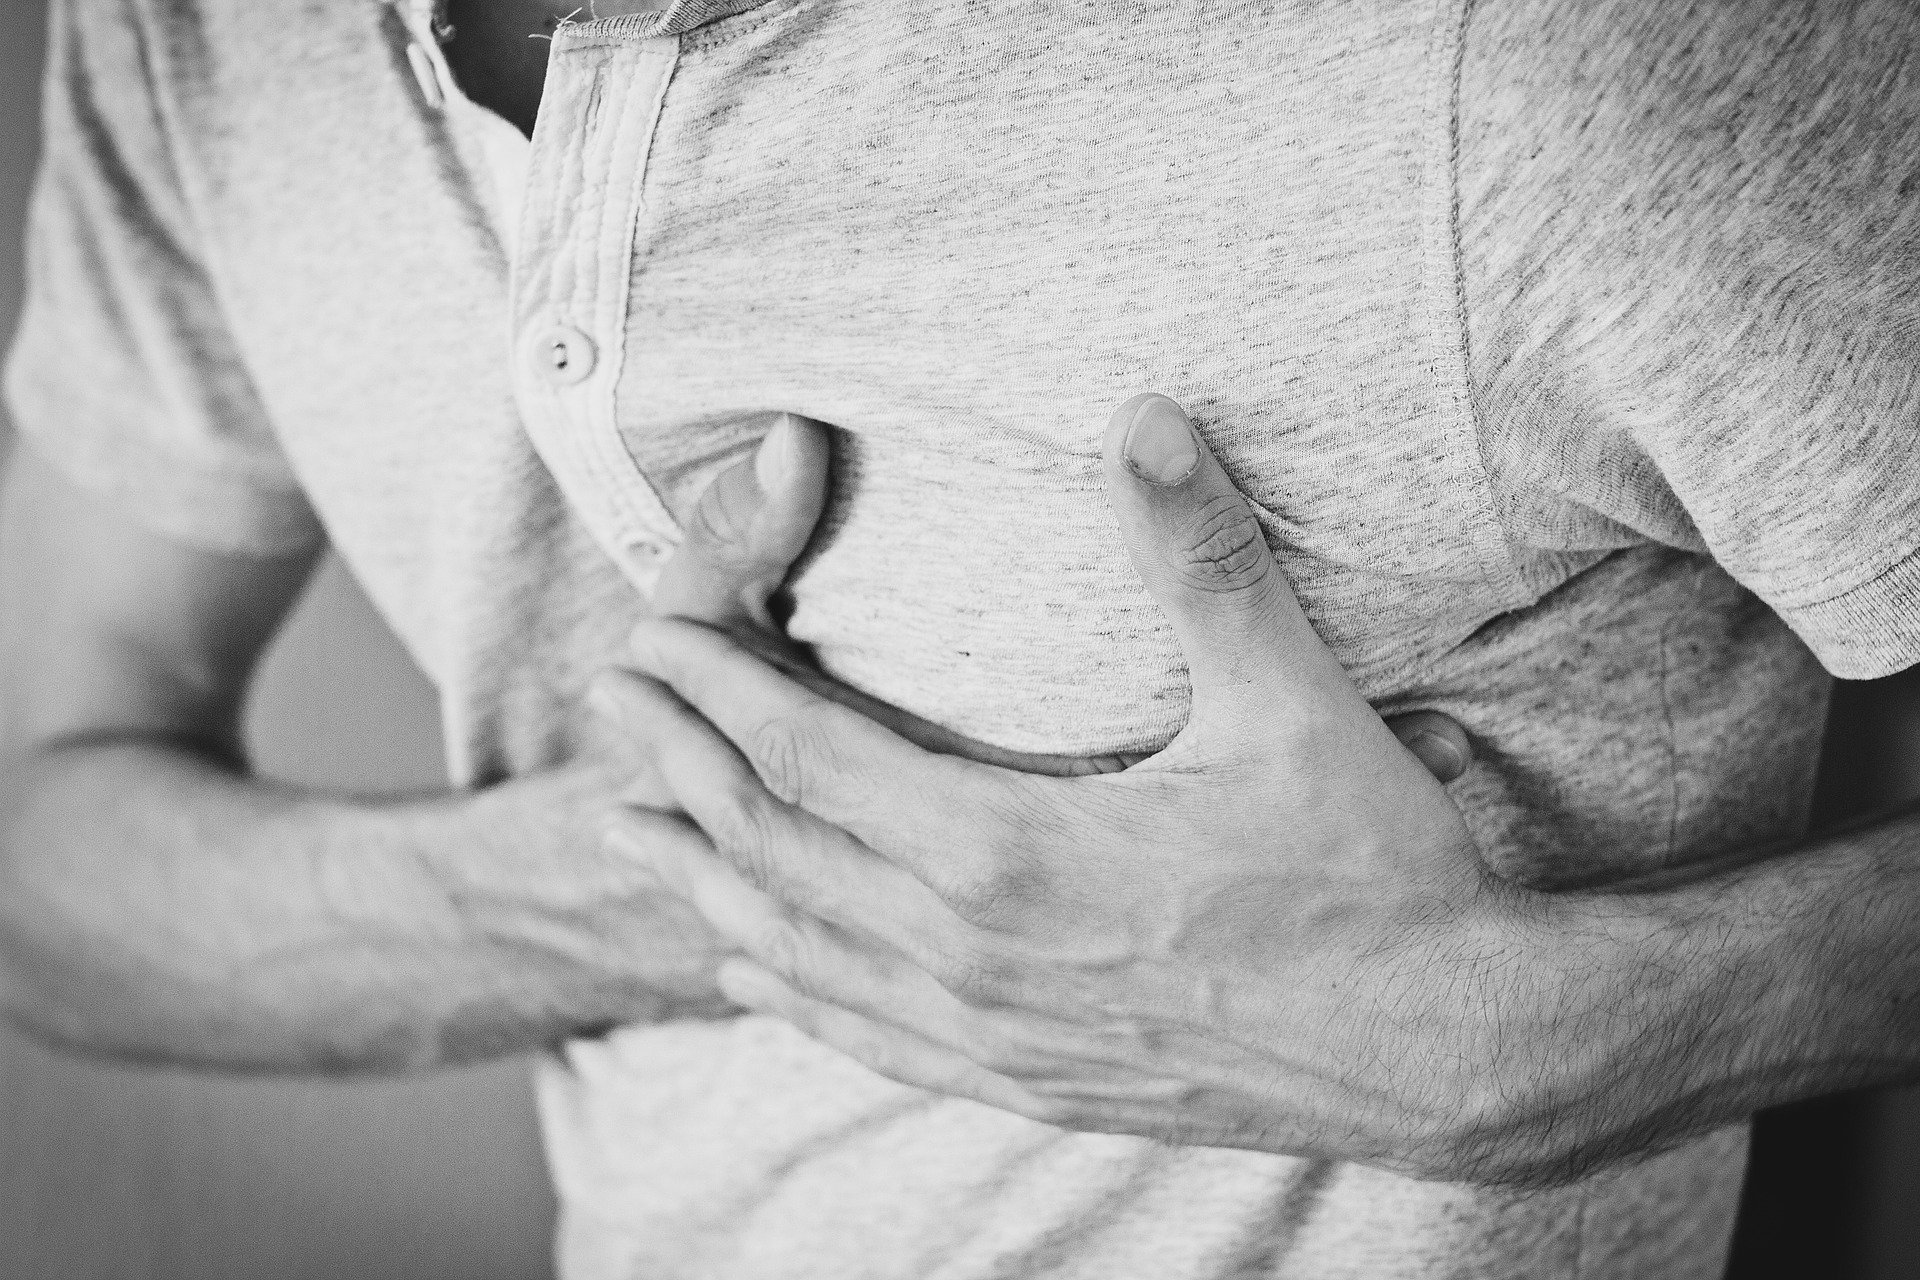 Heart Health: How To Make The Perfect Heart Attack